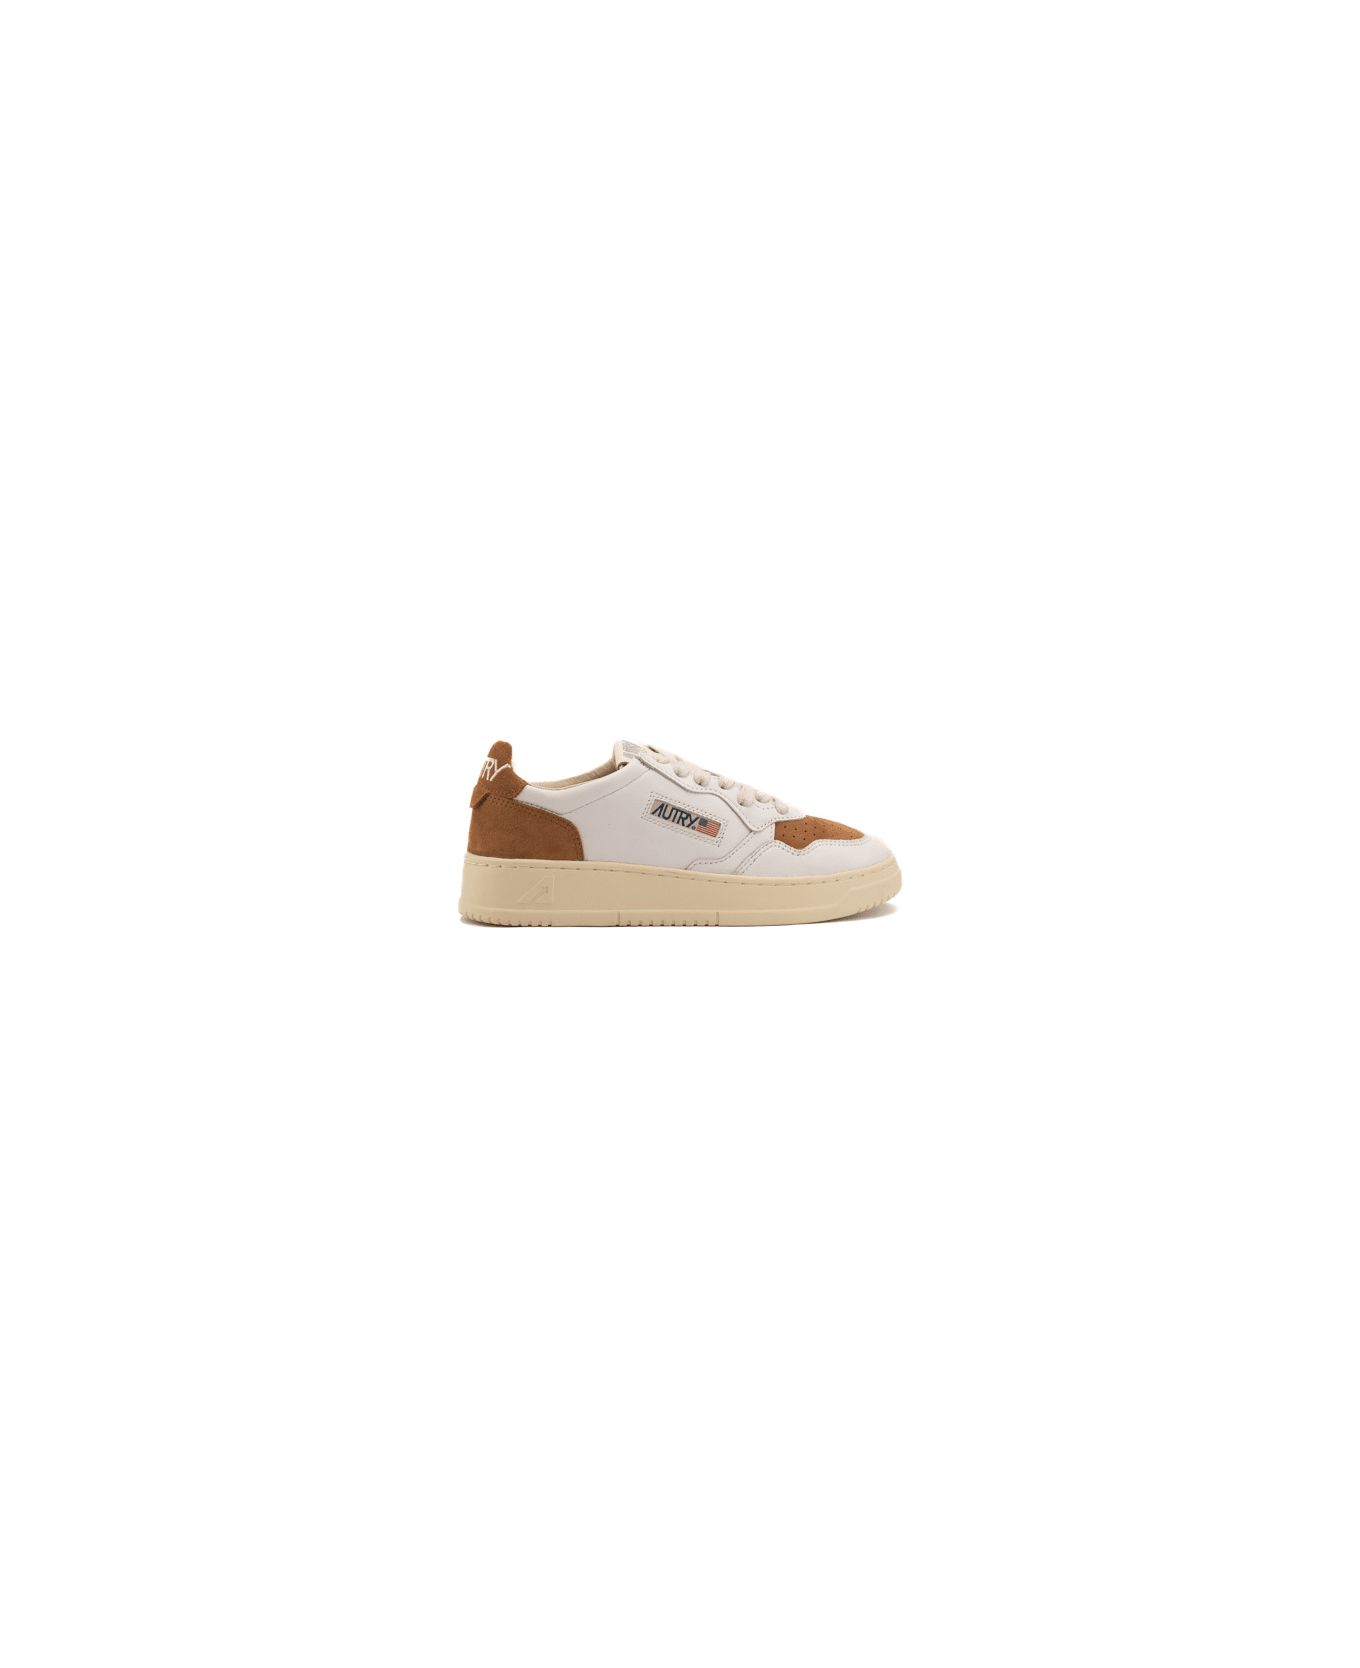 Autry Medalist Low Sneakers - Wht/crml スニーカー